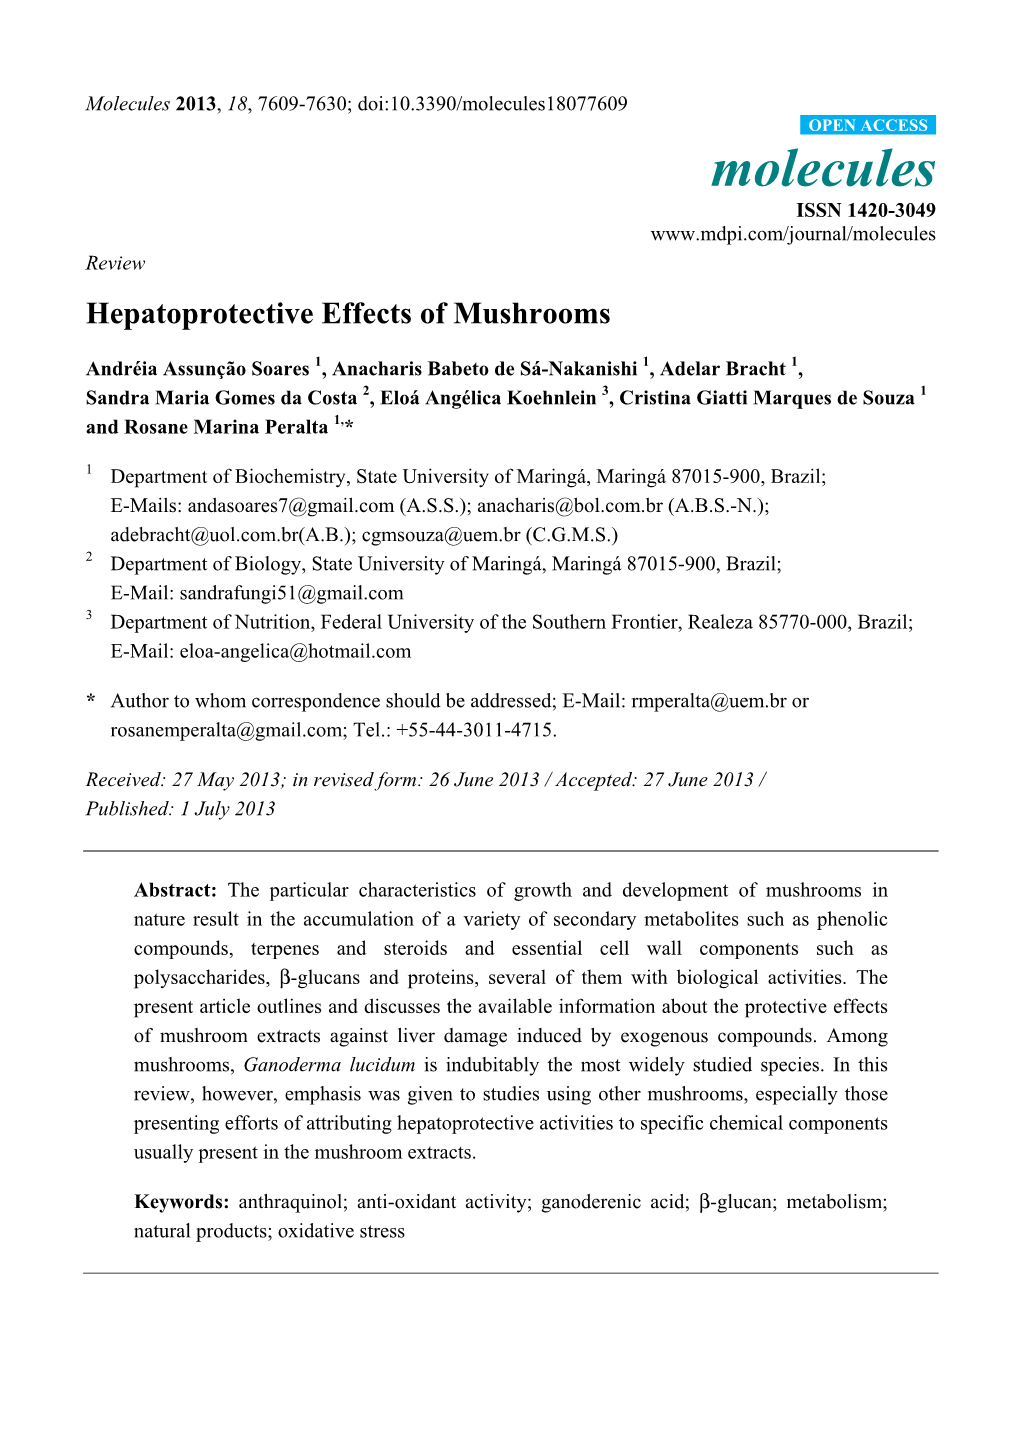 Hepatoprotective Effects of Mushrooms